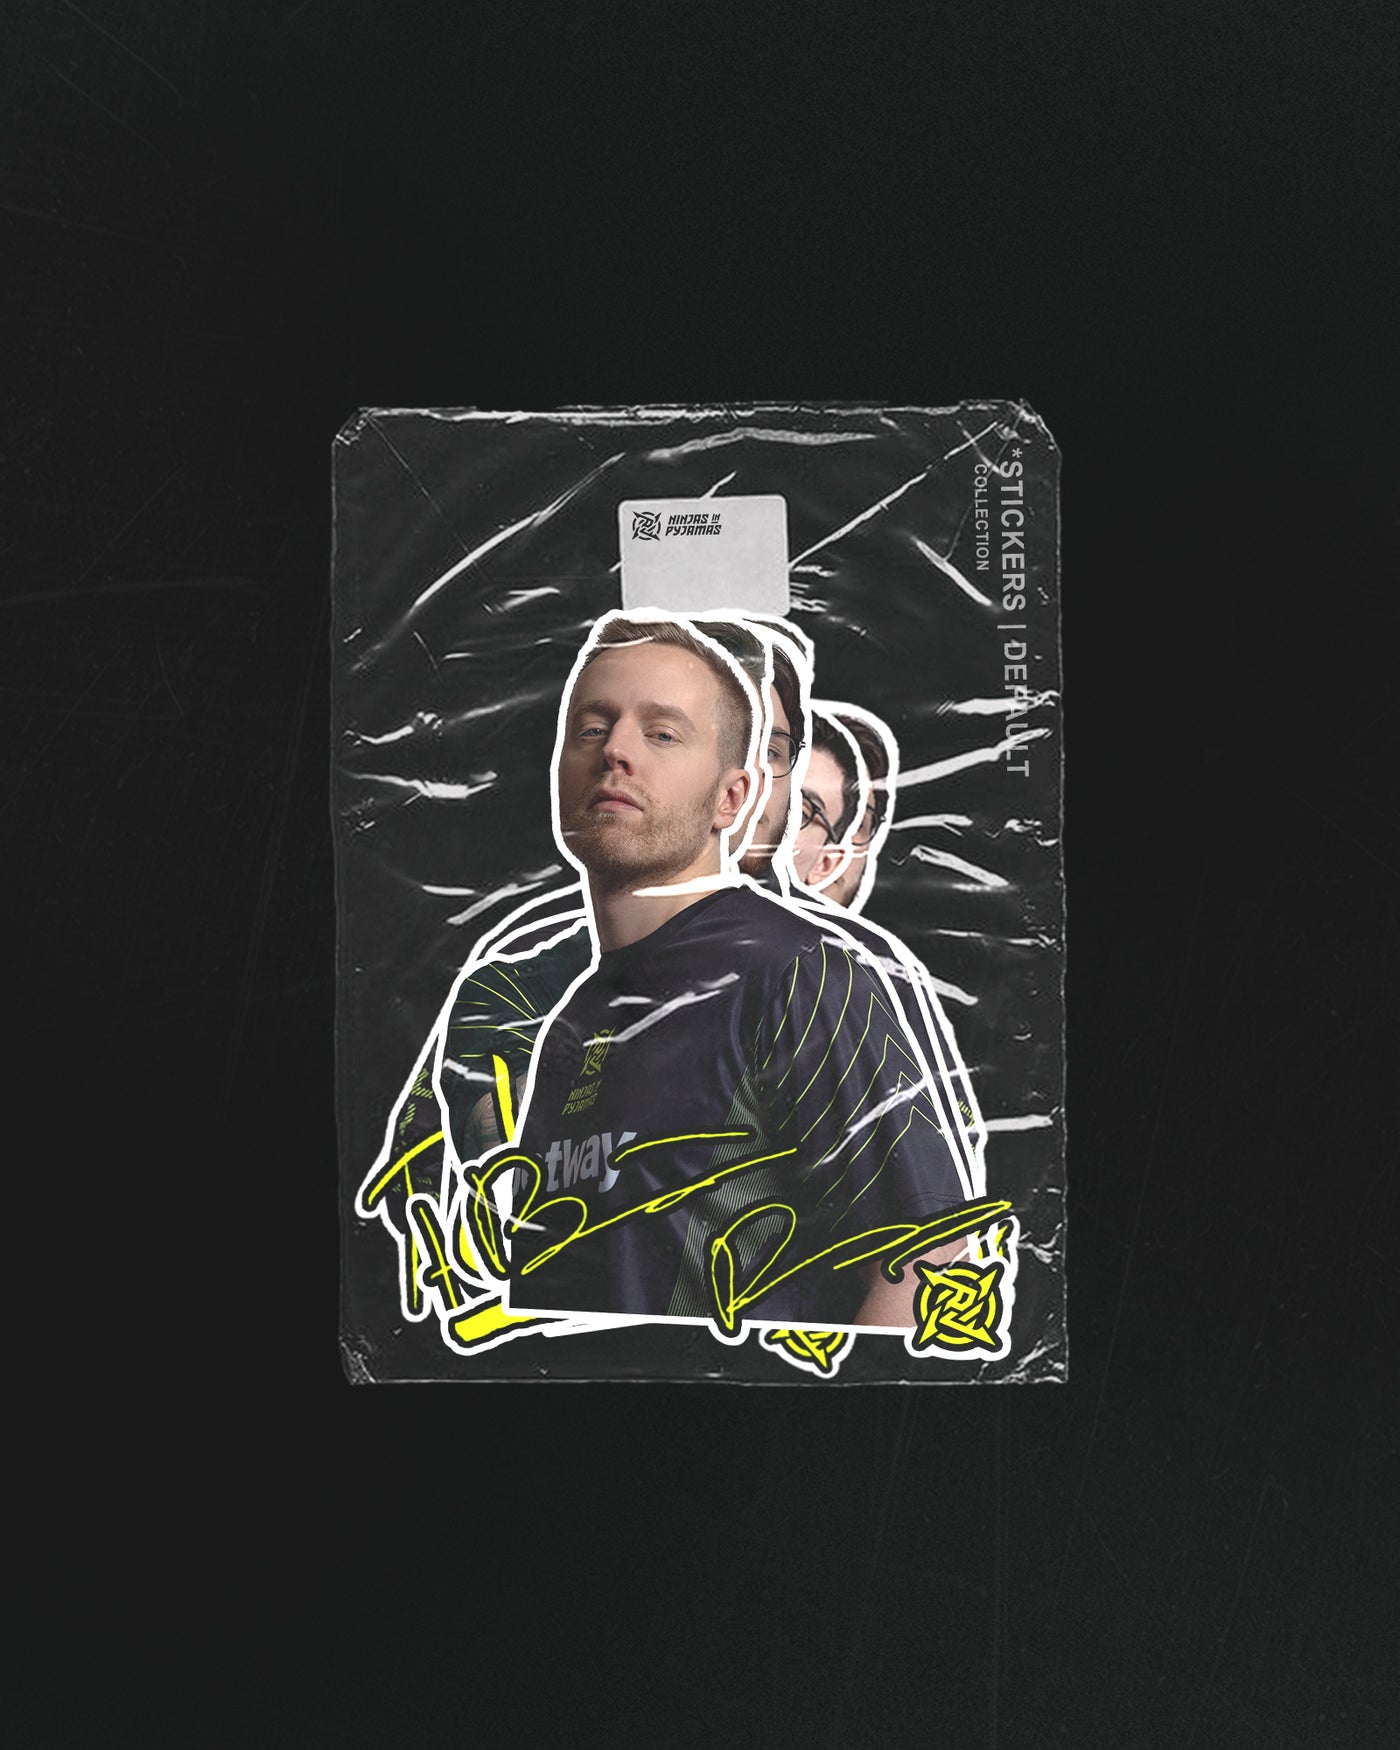 CSGO player stickers from Ninjas in Pyjamas Shop. A collection of physical Ninjas in Pyjamas CS:GO roster player stickers displayed in a cut-out style. Each sticker features the portrait of each NiP CS:GO player. The stickers are colorful and intricately designed, with an addition of players signatures on each sticker.